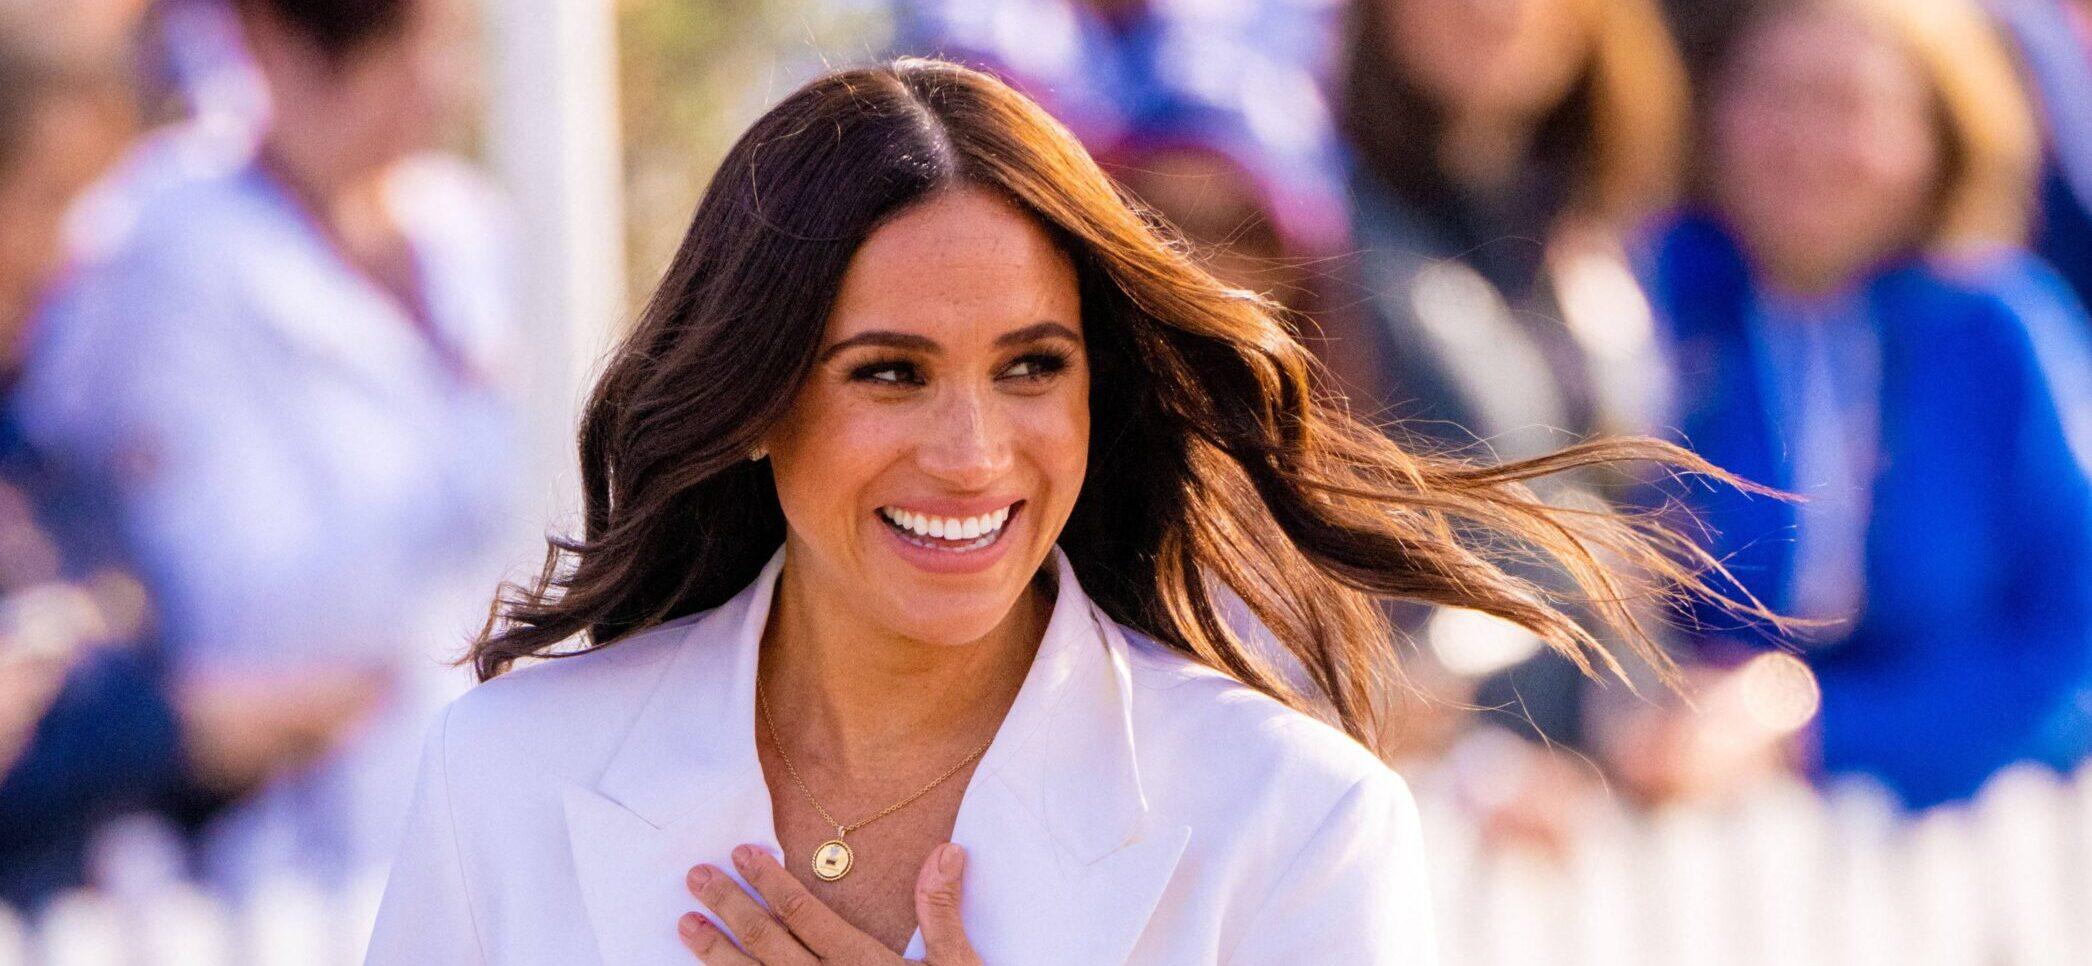 Royal Fans React To Meghan Markle Starring In Coffee Ad: ‘We Love A Hardworking Duchess!’